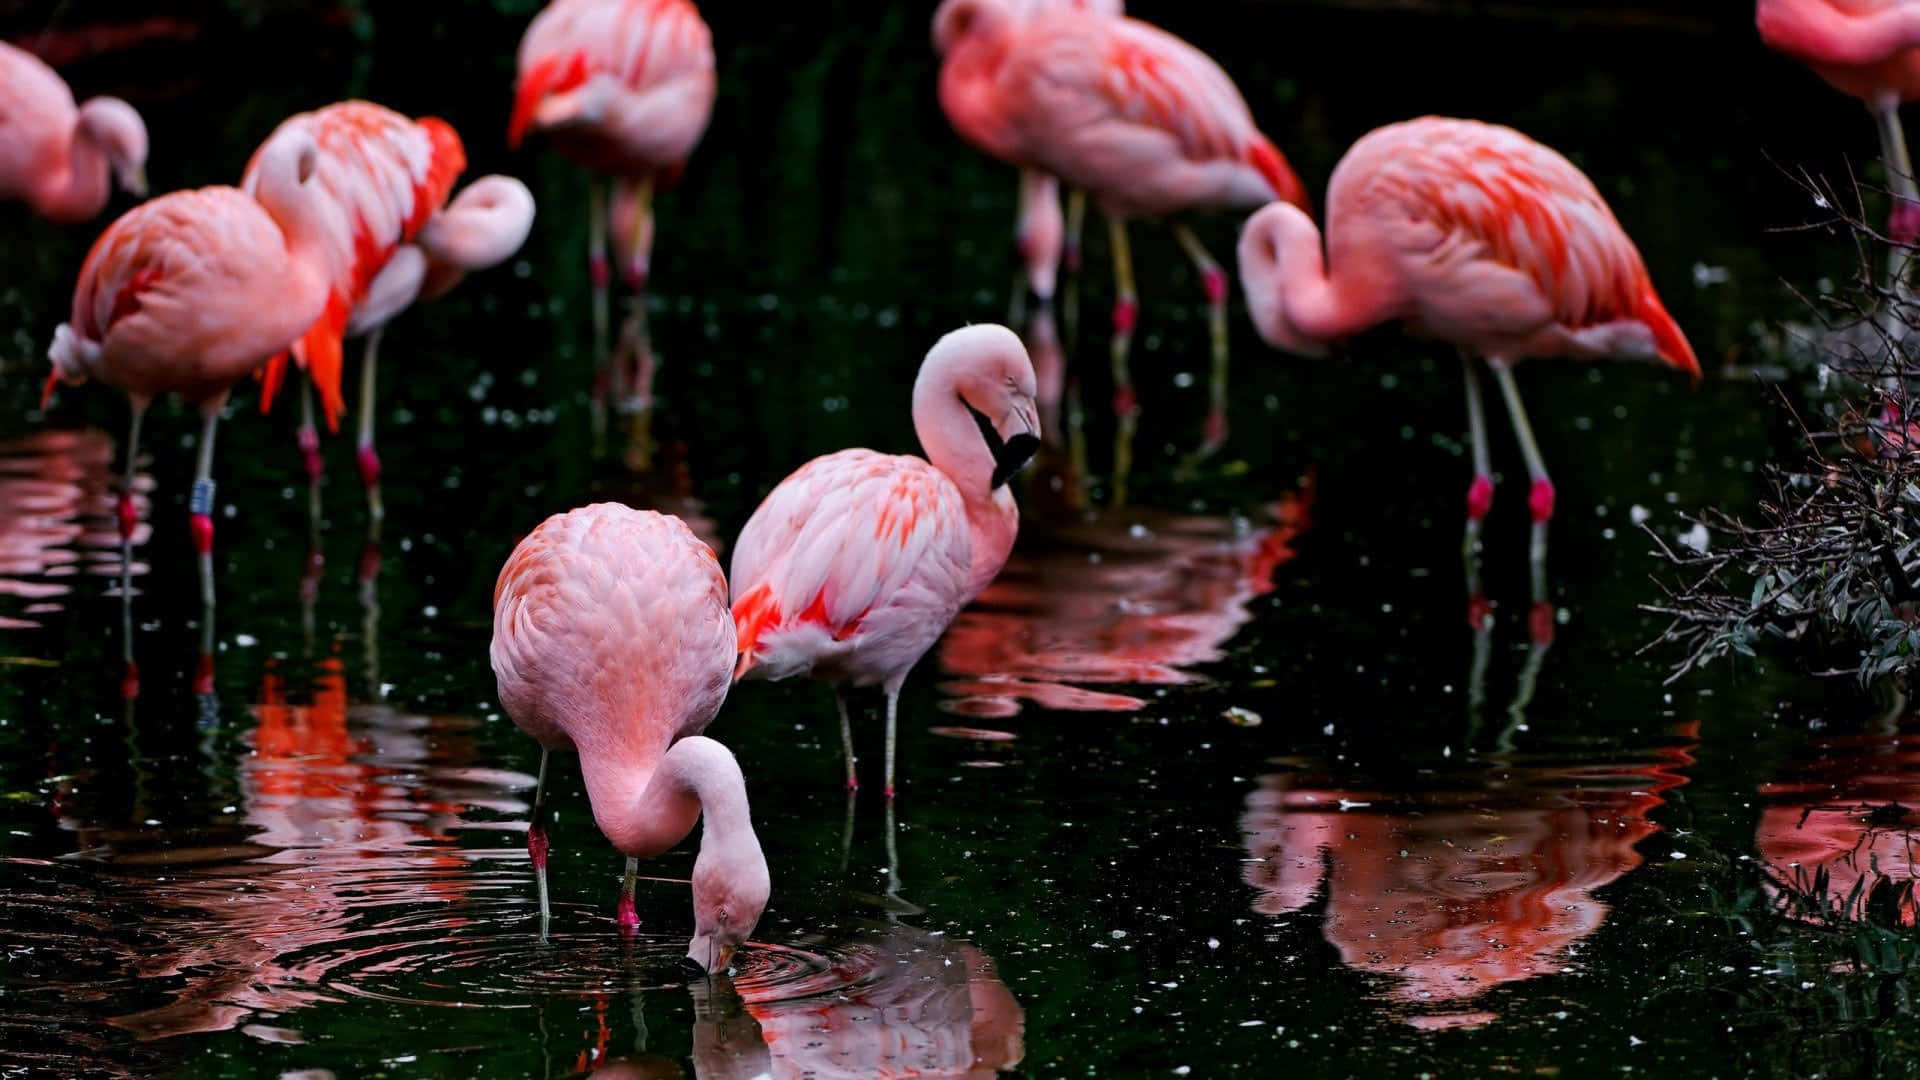 Flaunt your style with this unique Flamingo Patterned Laptop Wallpaper